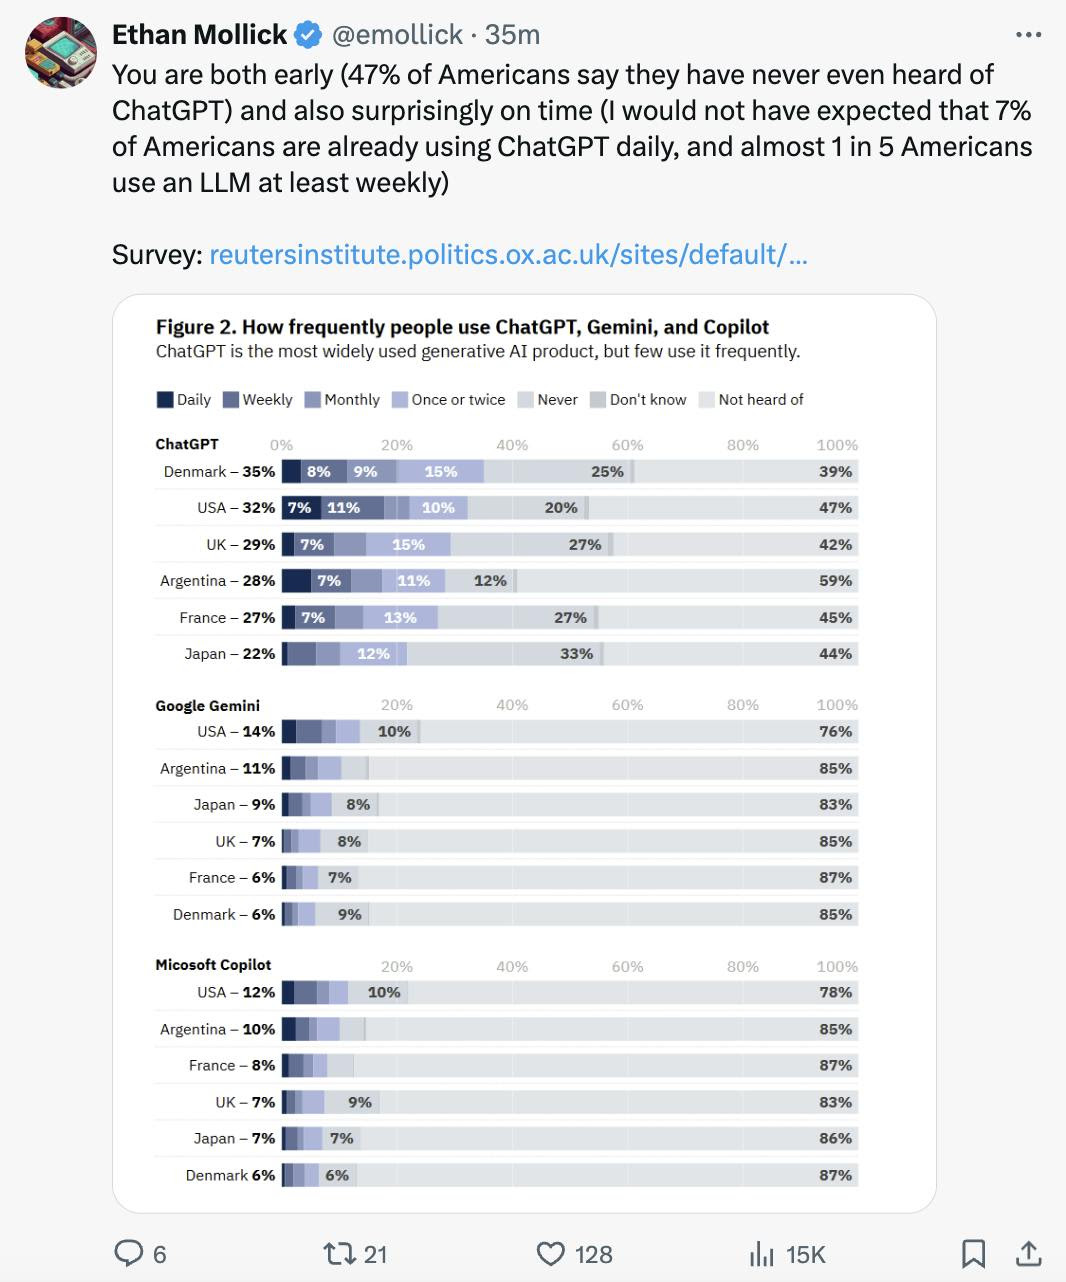 "You are both early (47% of Americans say they have never even heard of ChatGPT) and also surprisingly on time (I would not have expected that 7% of Americans are already using ChatGPT daily, and almost 1 in 5 Americans use an LLM at least weekly)"